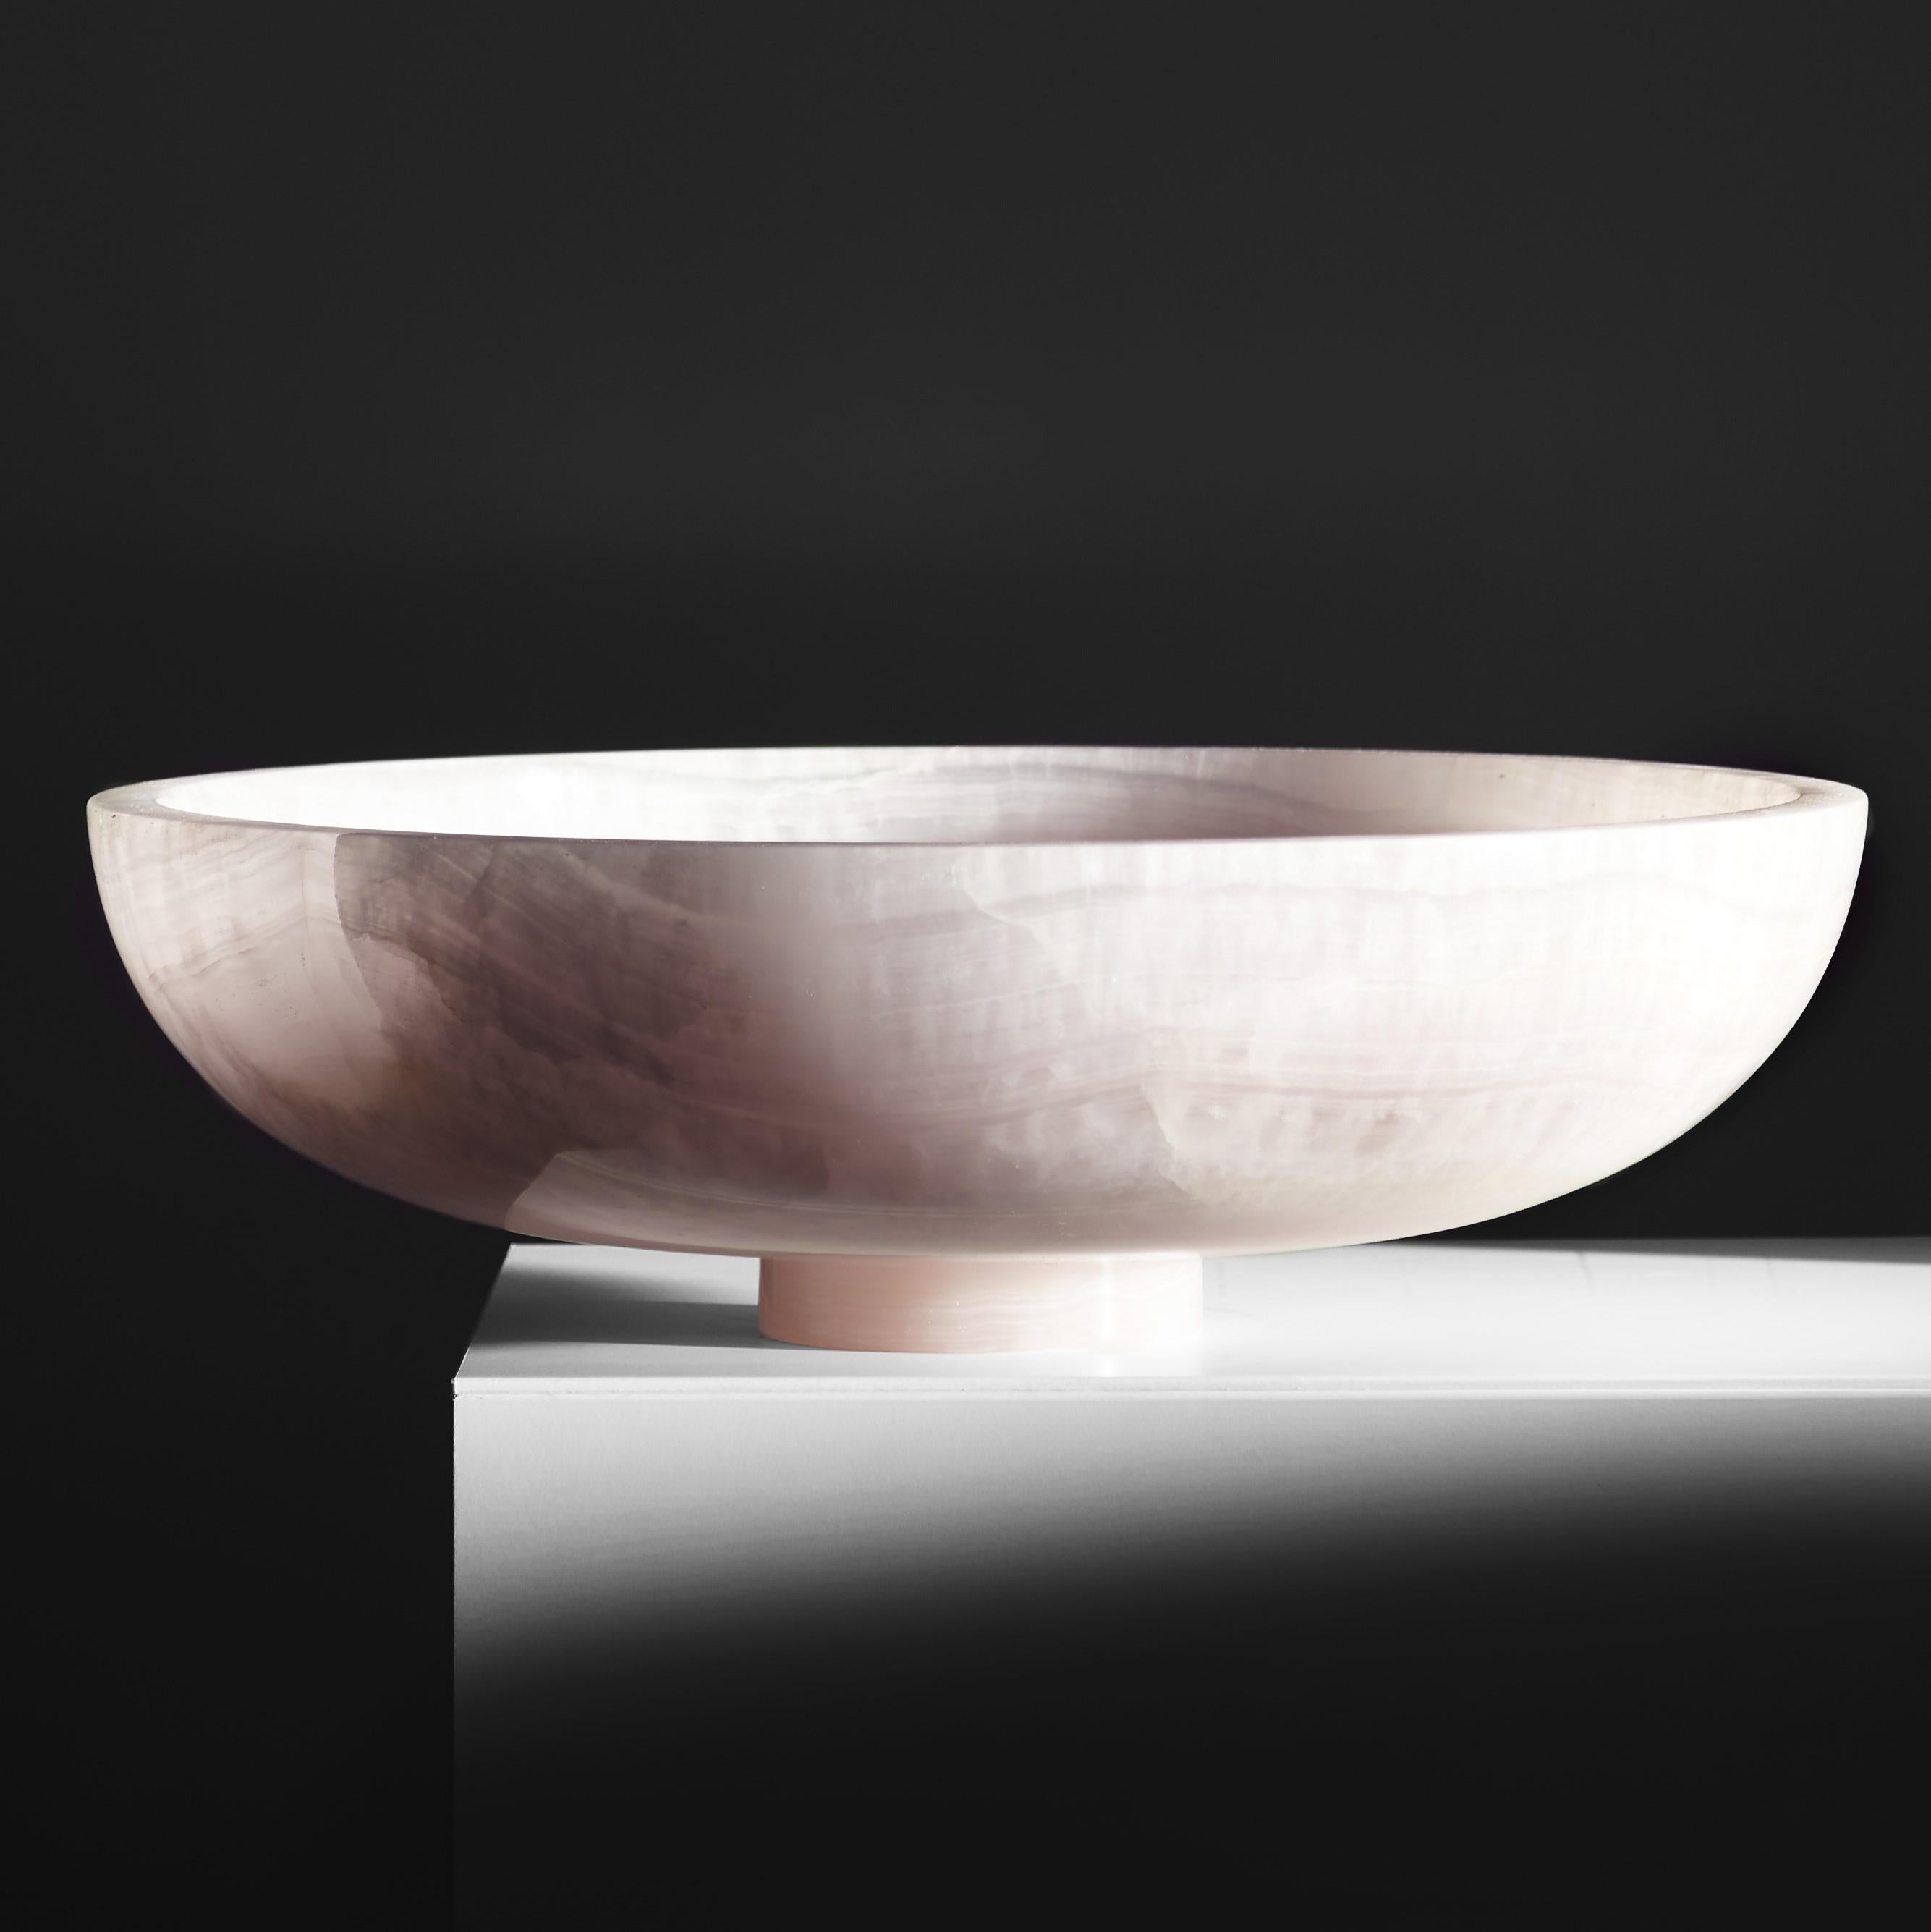 Onyx twosidestory bowl XL by Lisette Rützou
Dimensions: D 40 cm
Materials: Levanto Bordeaux marble

 Lisette Rützou’s design is motivated by an urge to articulate a story. Inspired by the beauty of materials, form and architecture, each design